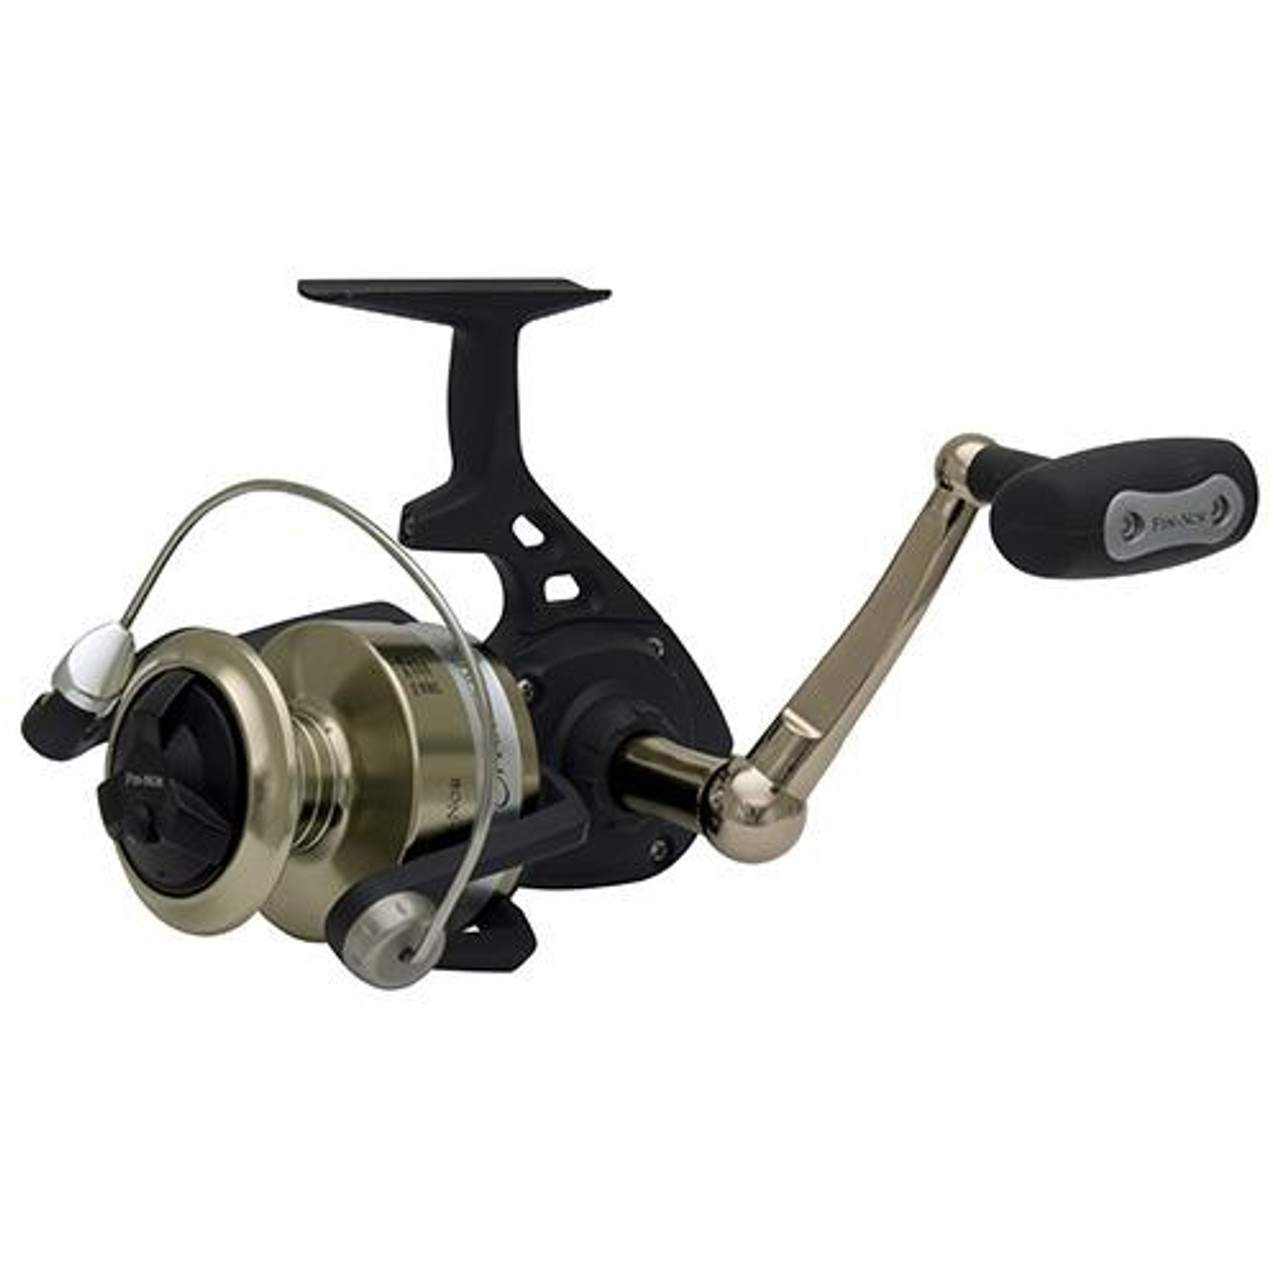 Zebco / Quantum Fin-nor Offshore Spinning Reel Size 45, 4.7:1 Gear Ratio,  36 Retrieve Rate, 4 Bearings, Left Hand, OFS4500A,,BX3